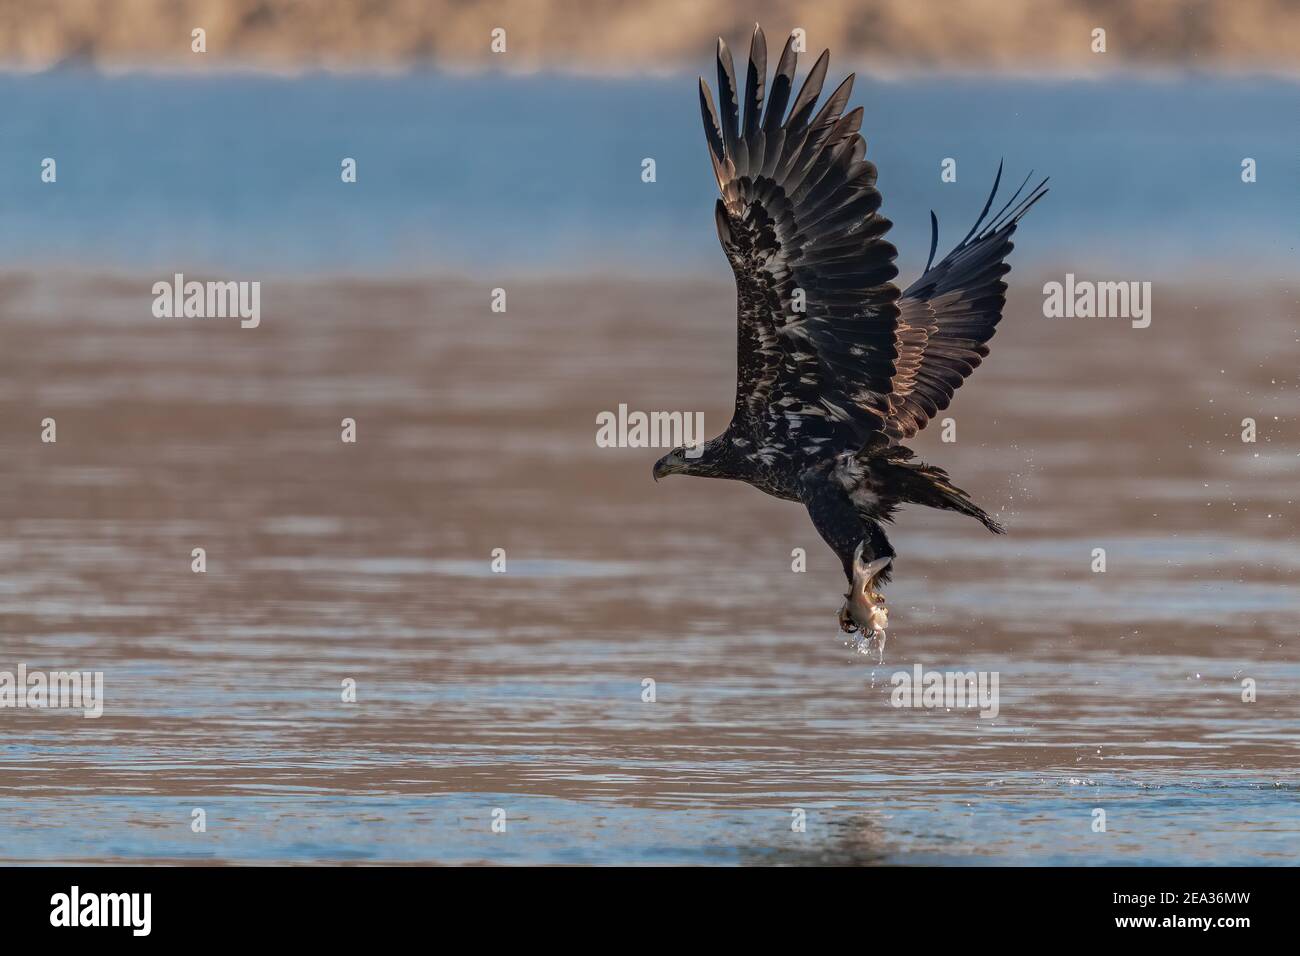 Juvenile Bald Eagle Flying in the Blue Sky over the Susquehanna River Stock Photo